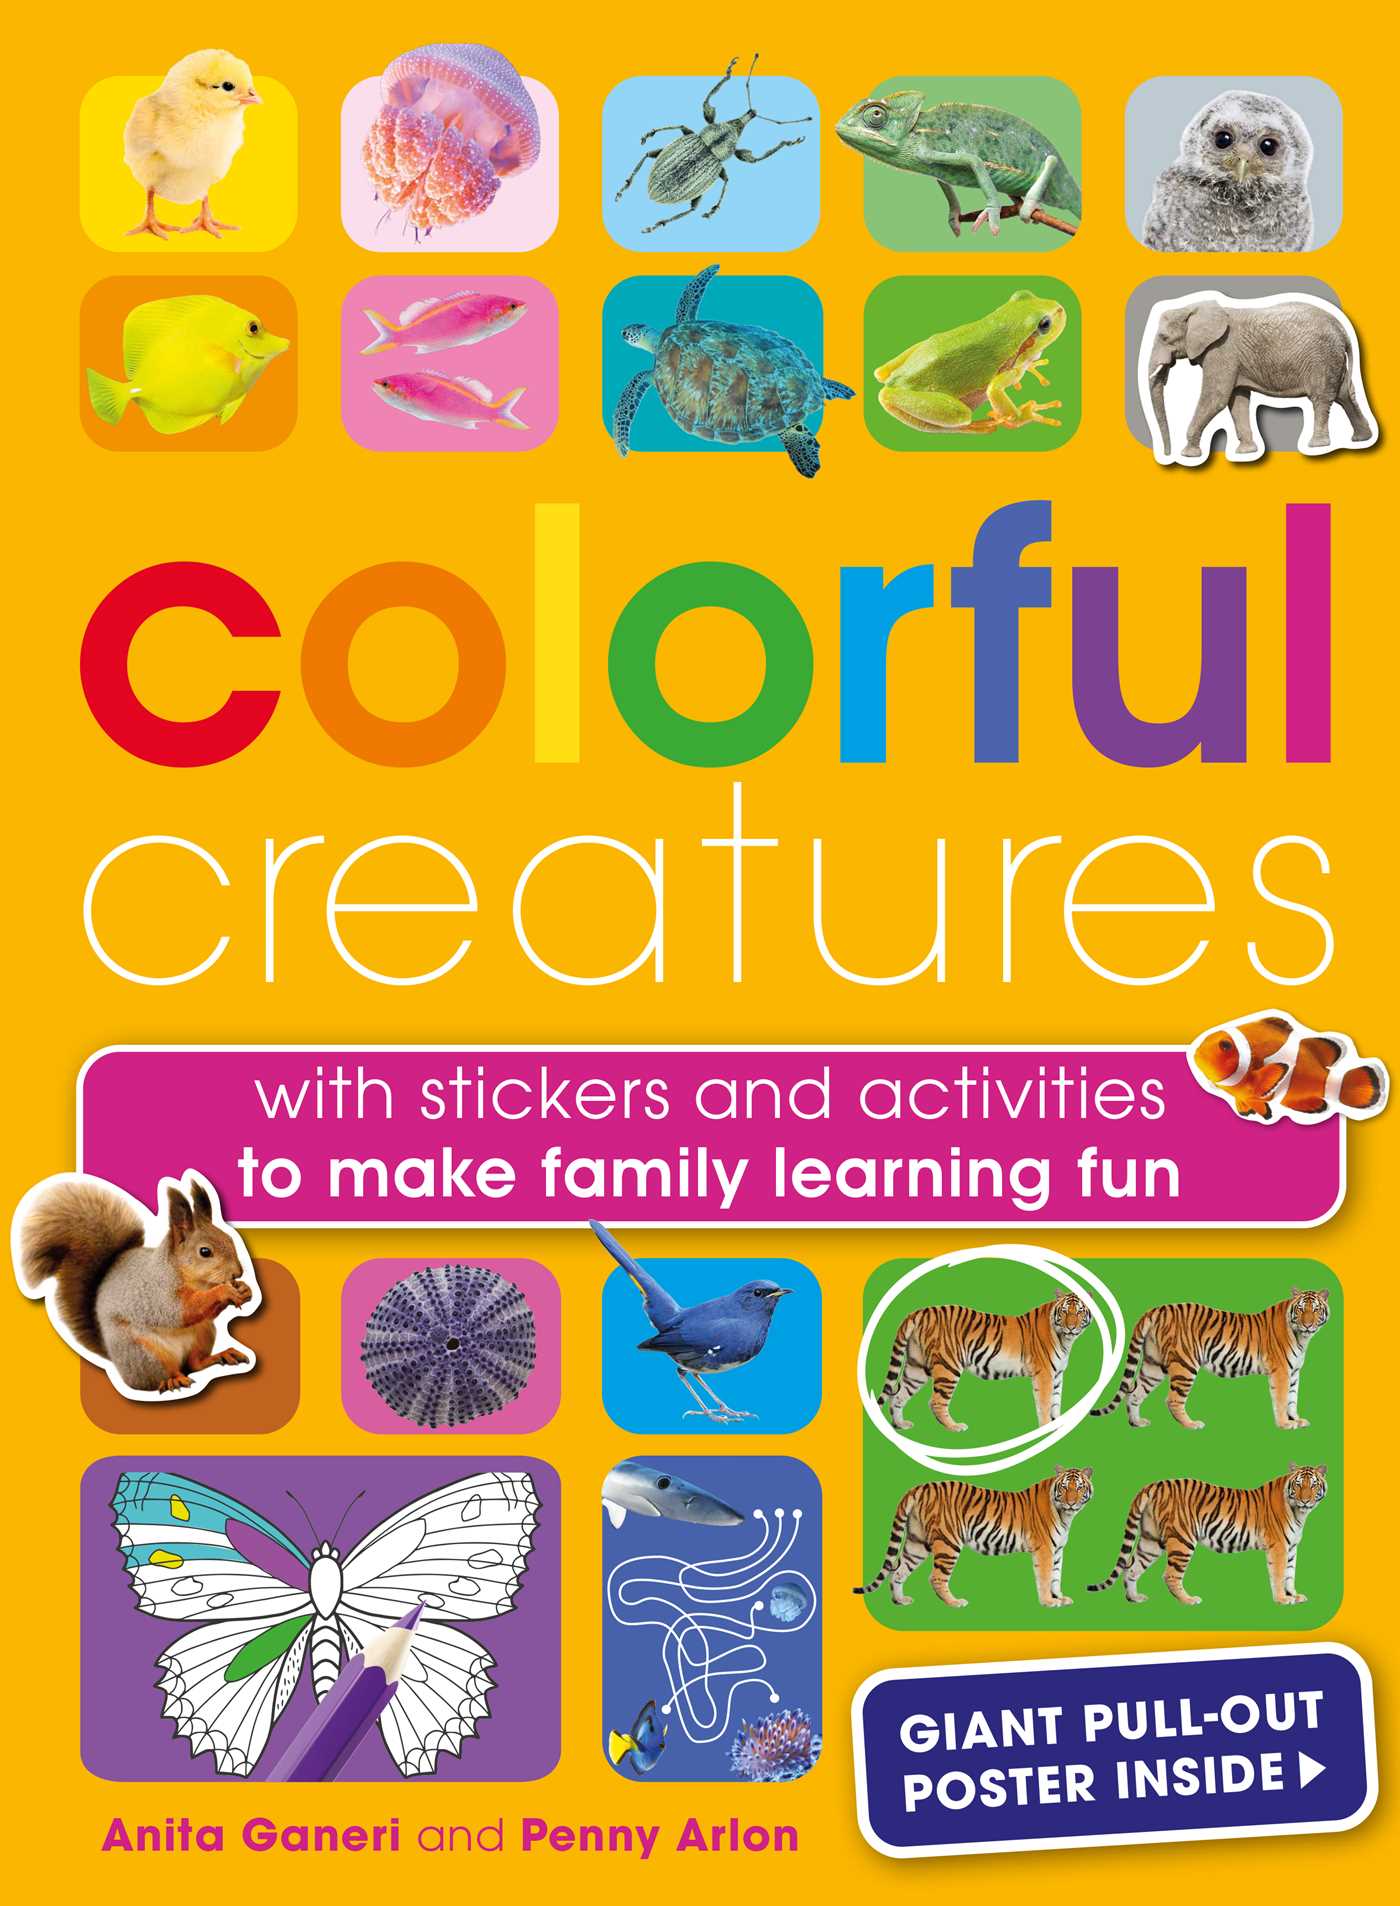 Colorful Creatures : With stickers and activities to make family learning fun